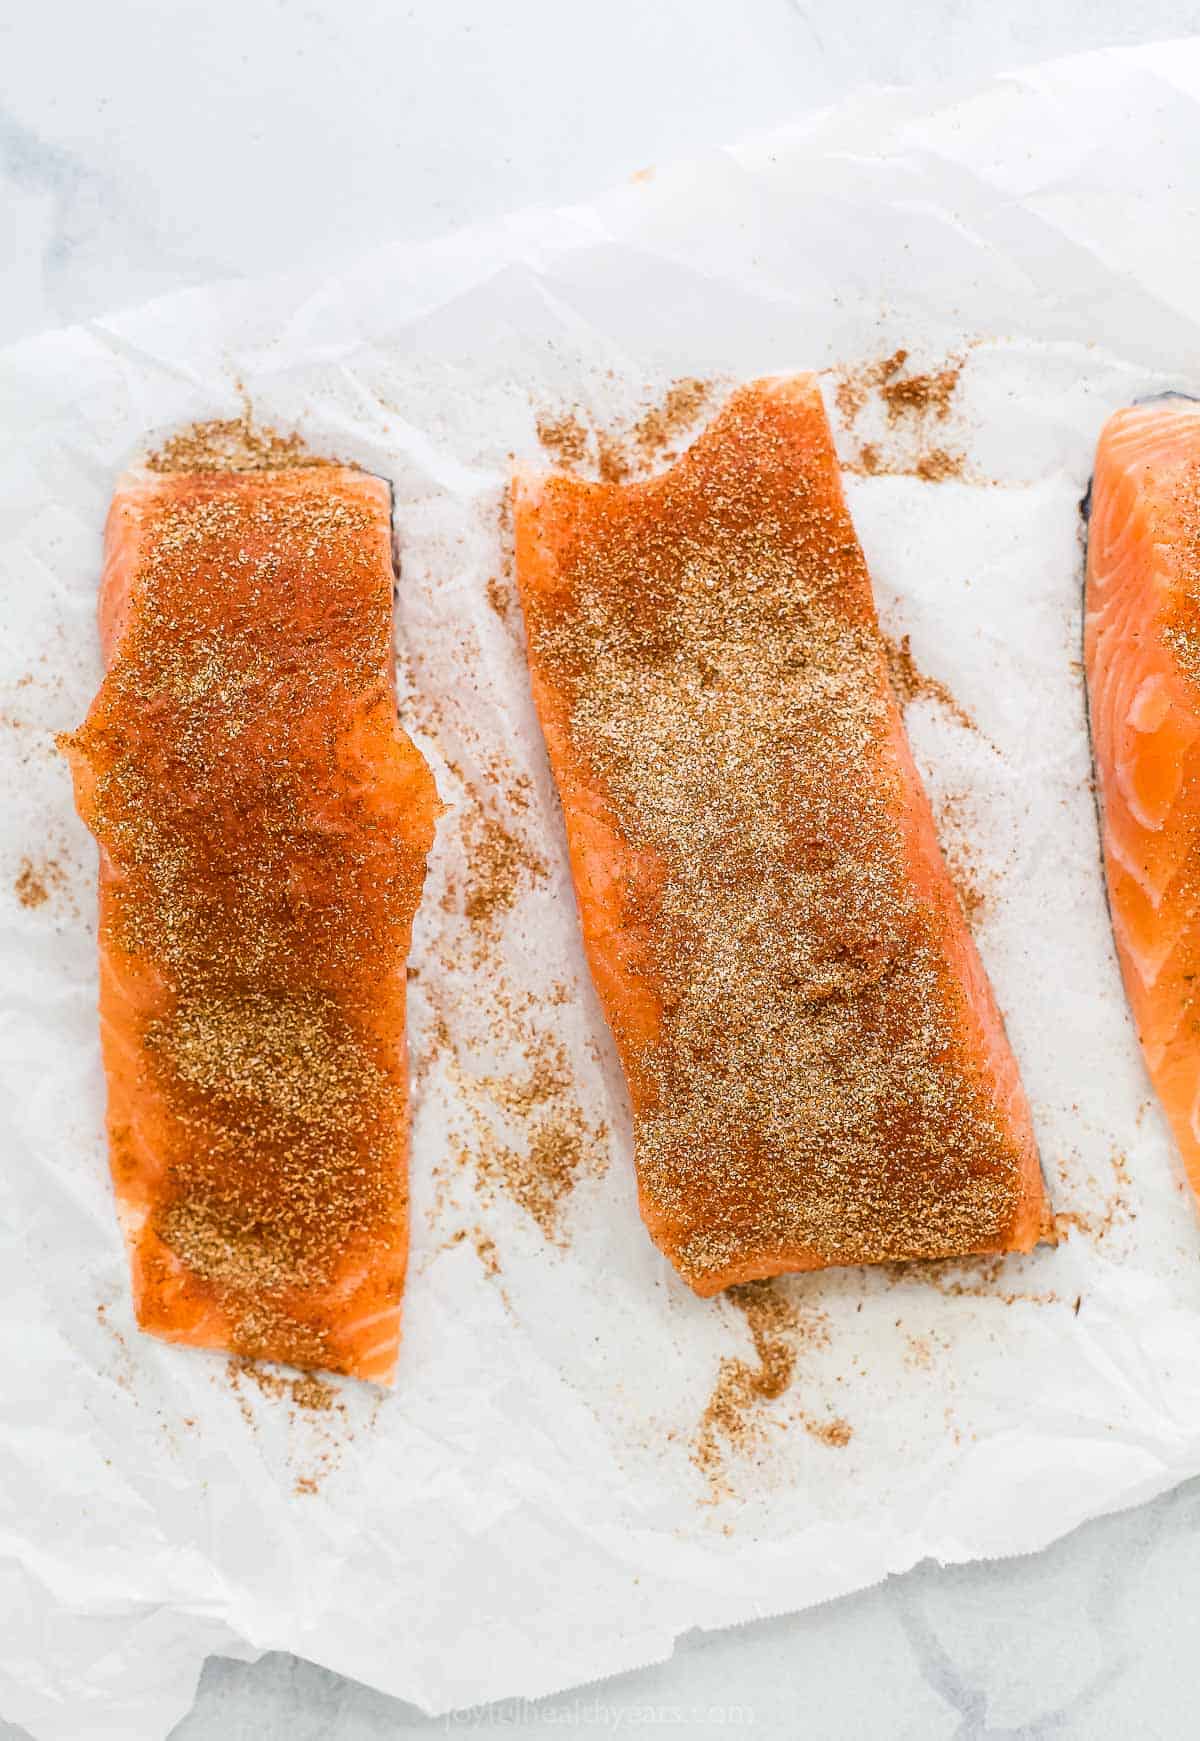 Three seasoned fish fillets lined up on a sheet of parchment paper